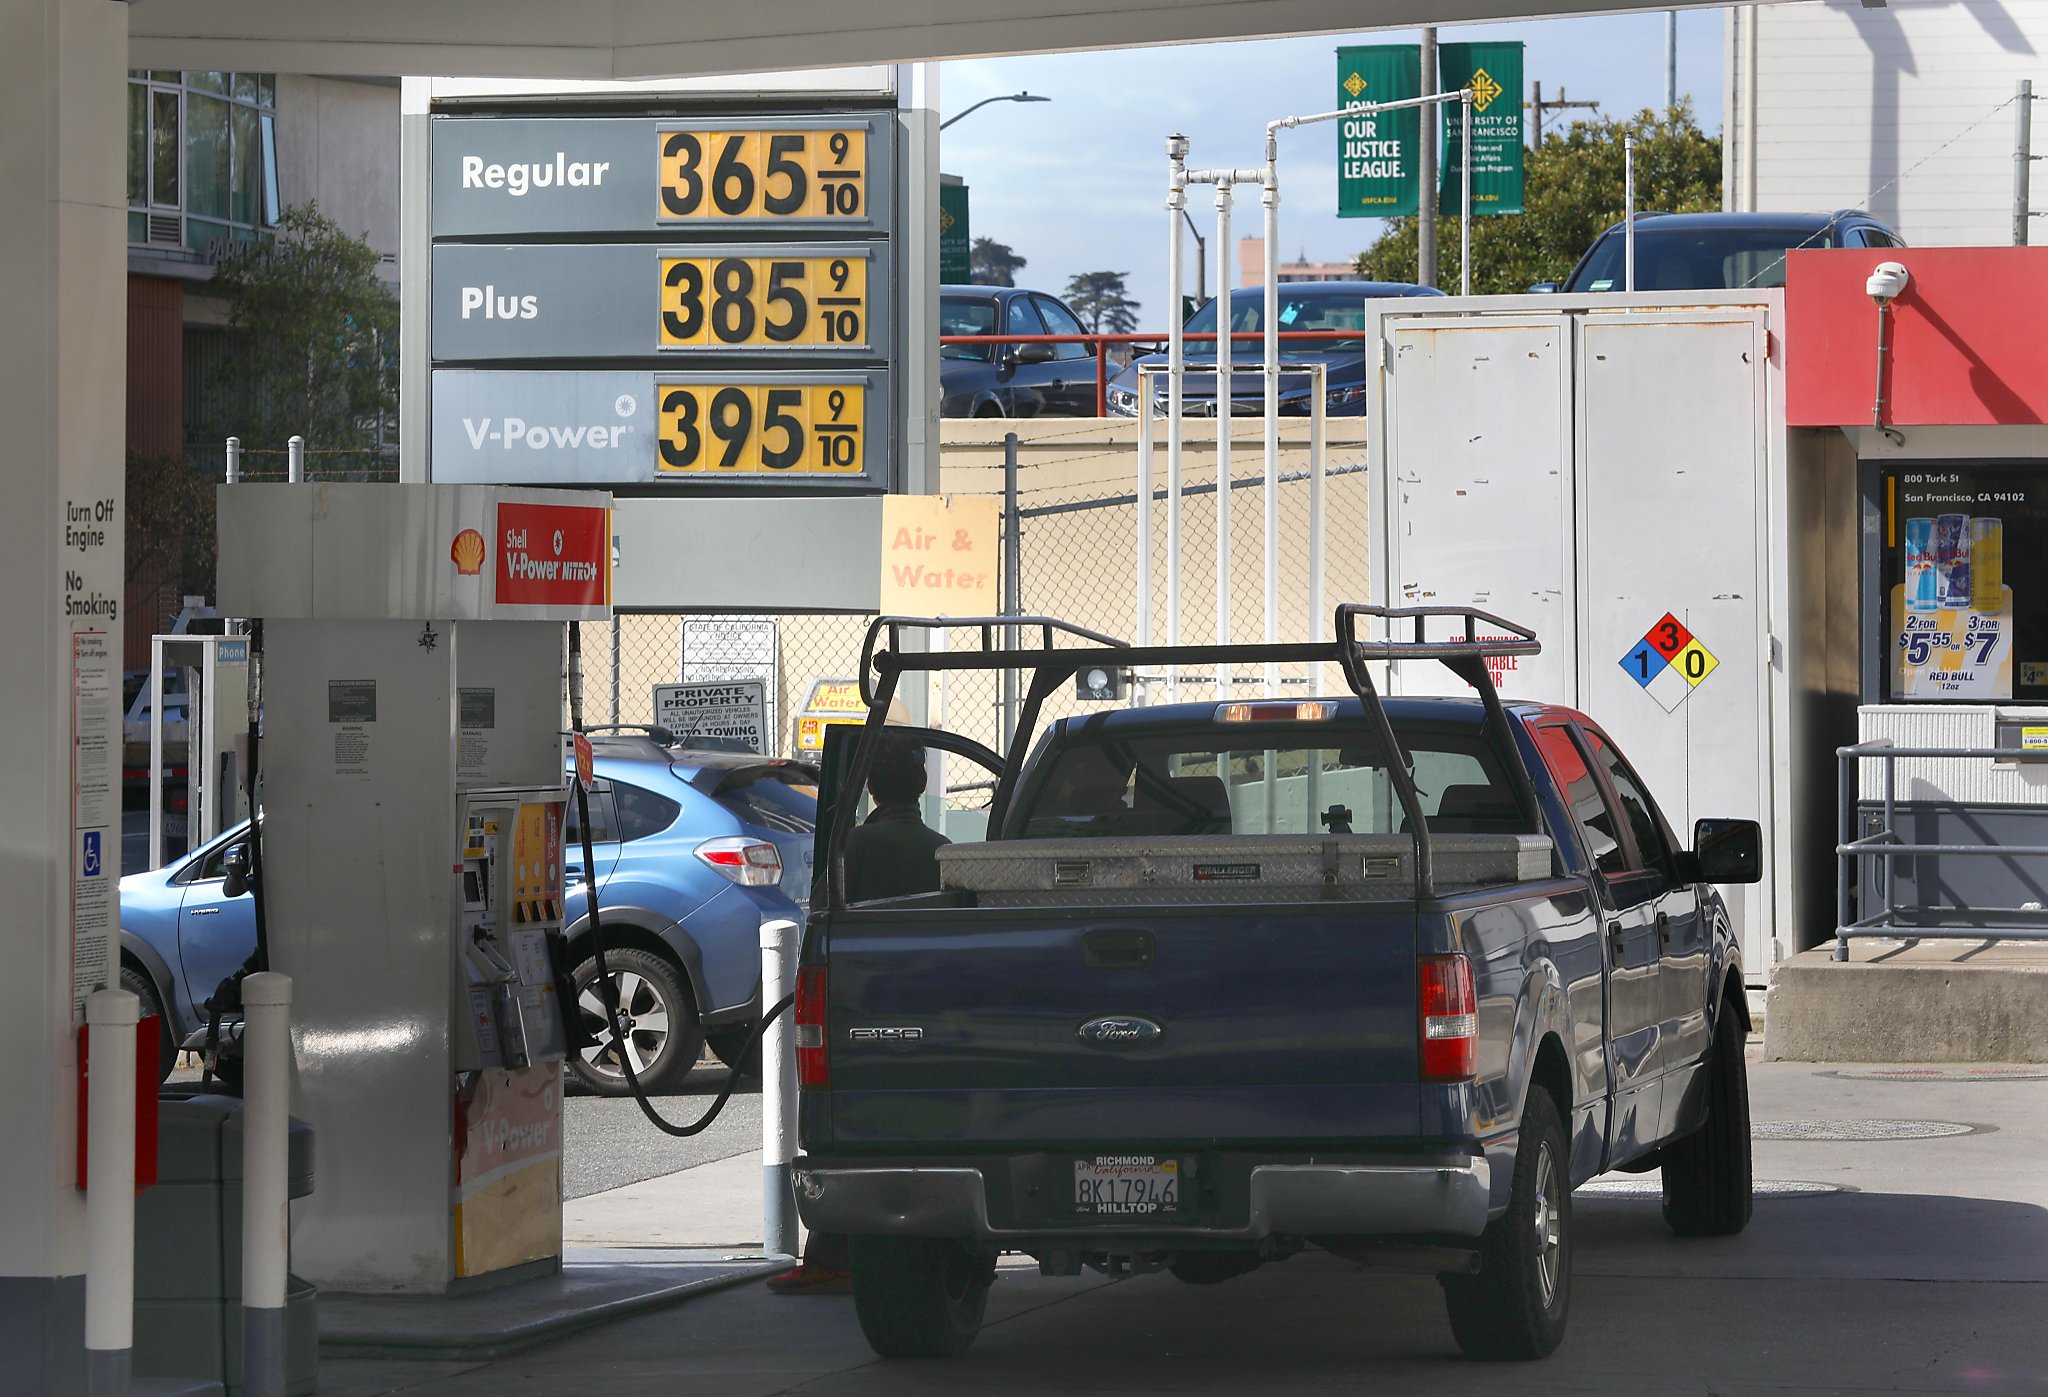 The Bay Area’s gas prices are the highest in the country